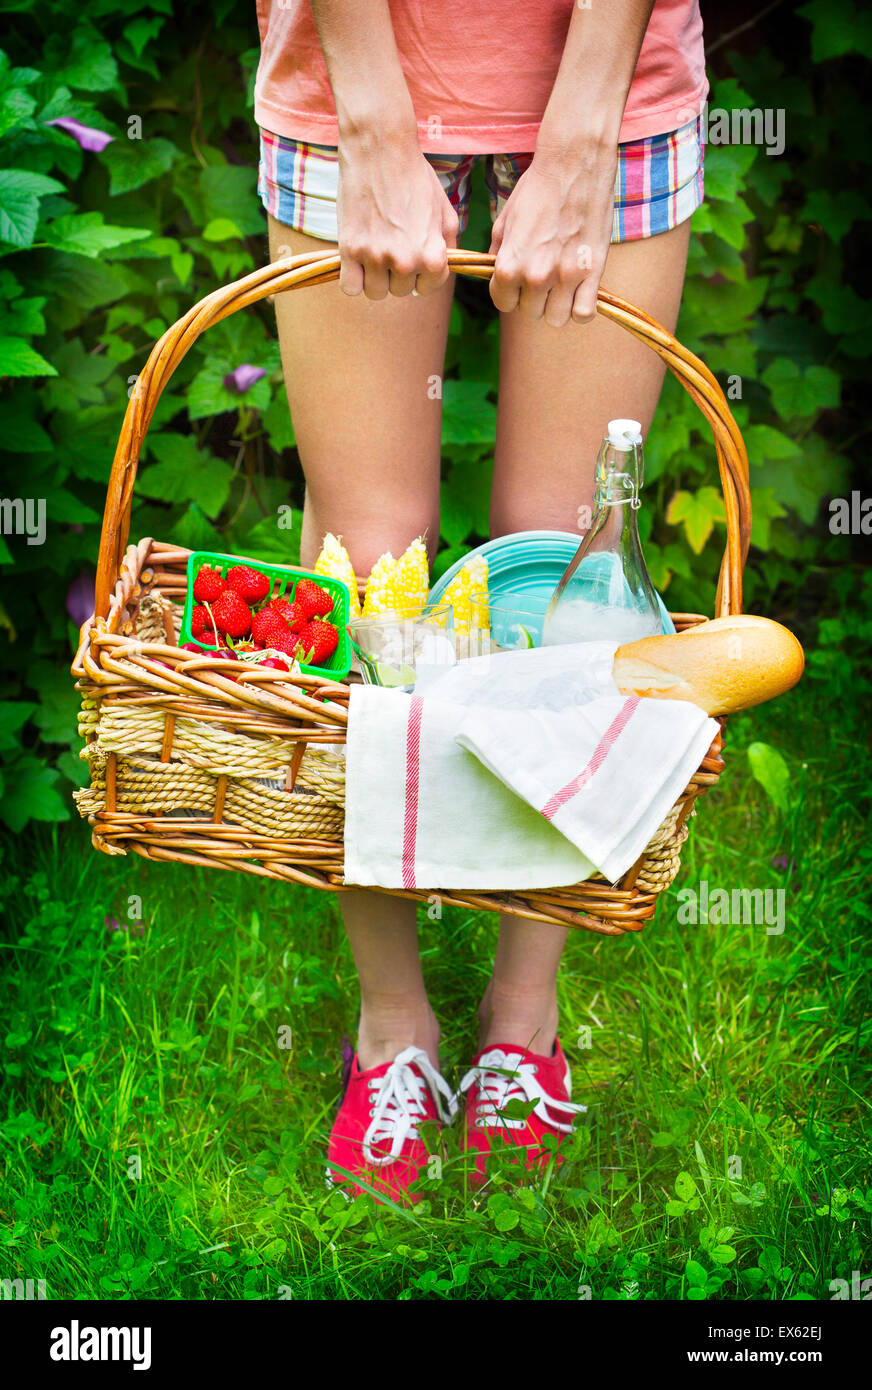 Young girl holding a picnic basket with berries, lemonade and bread. Stock Photo